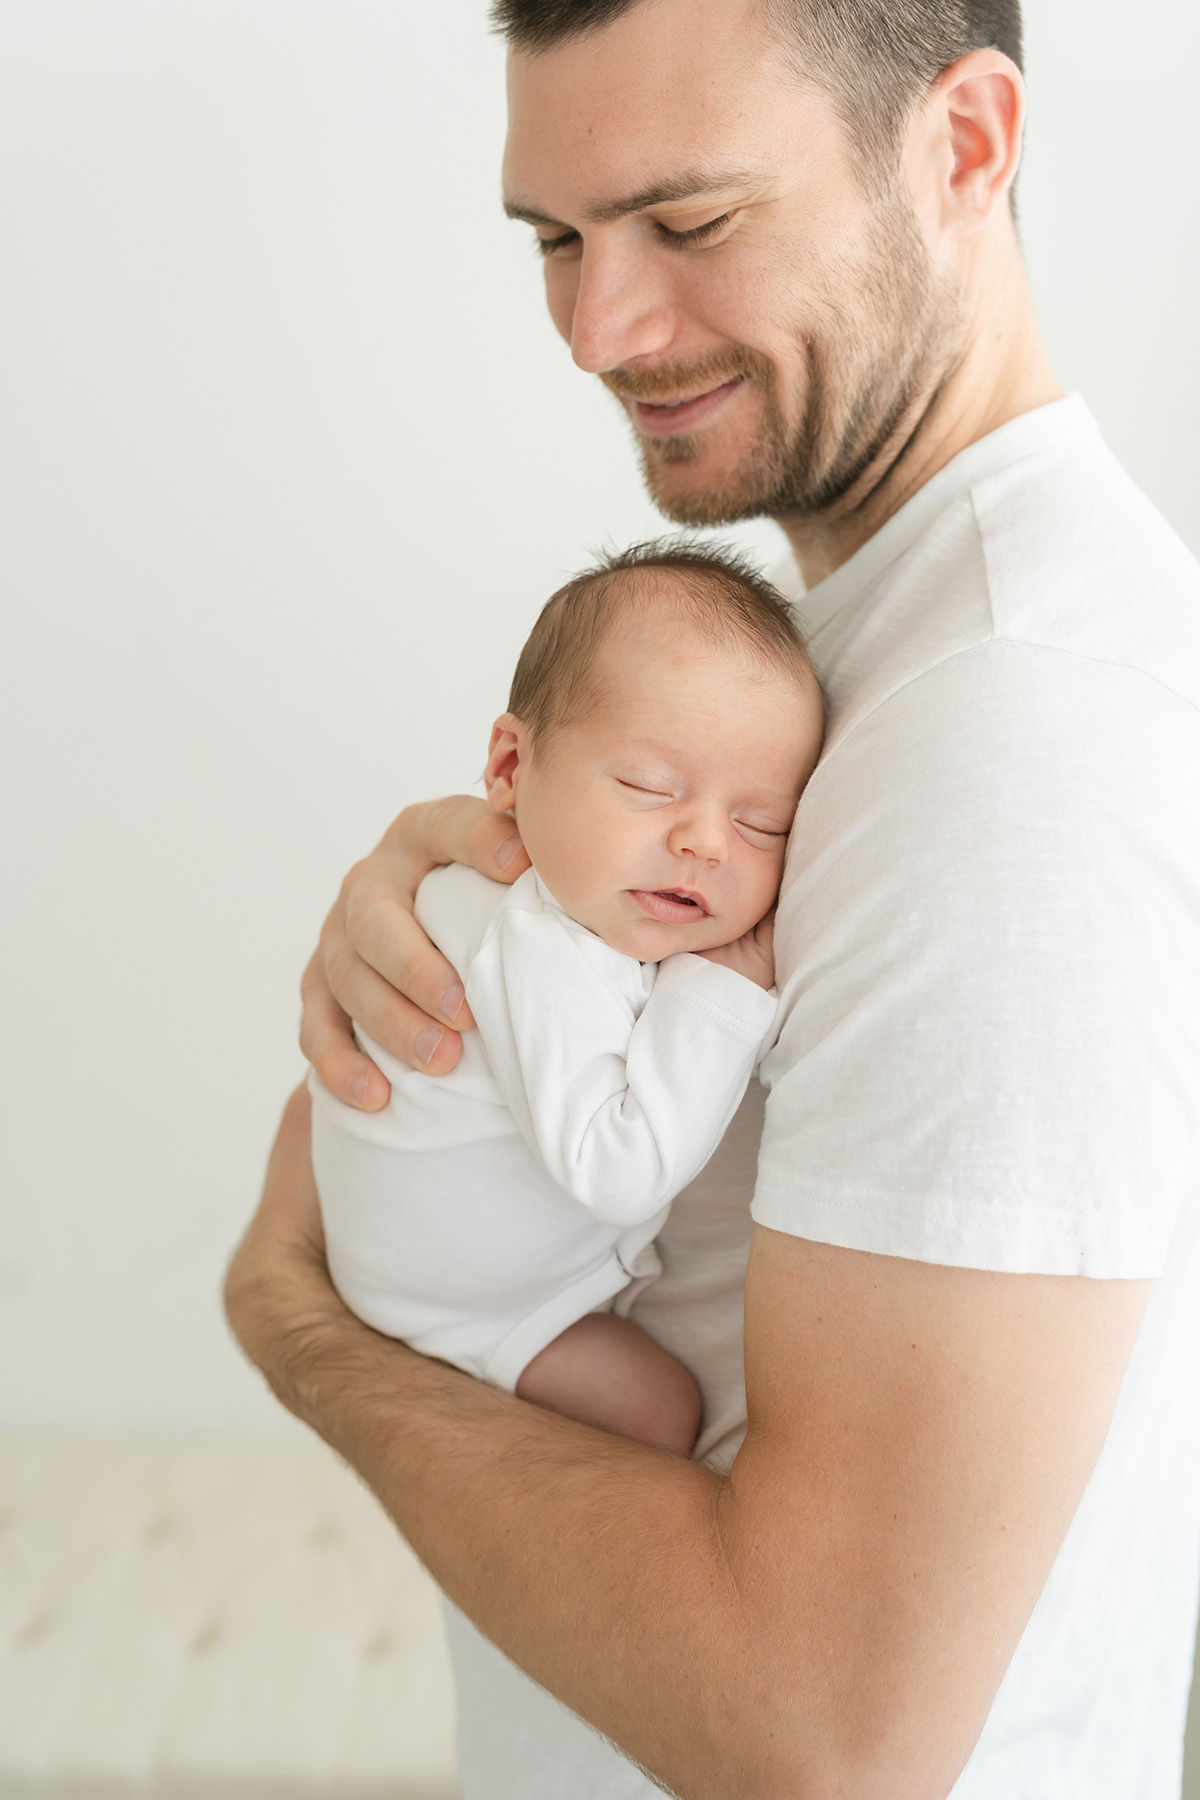 Louisville KY newborn baby and his dad smile during candid moment at Julie Brock Photography